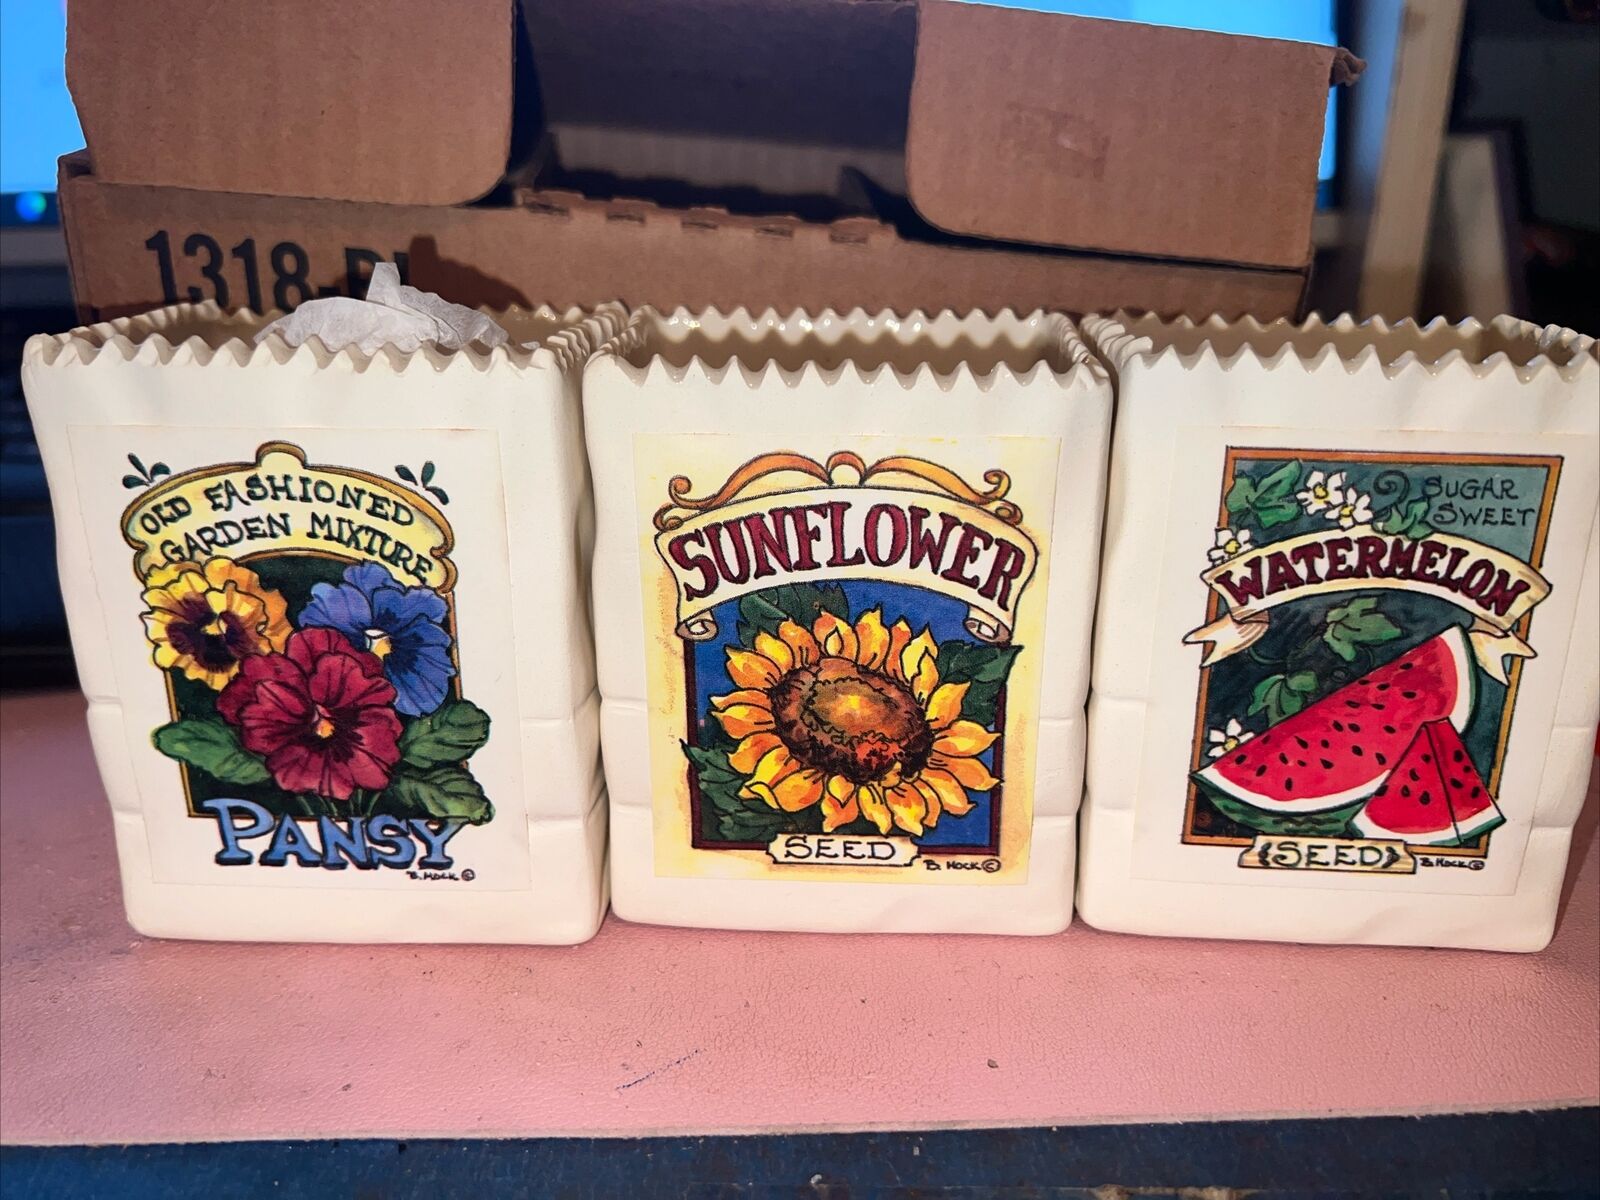 Vintage Home Interiors & Gifts Decor- Watermelon Seeds, Sunflower Seeds, Pansy